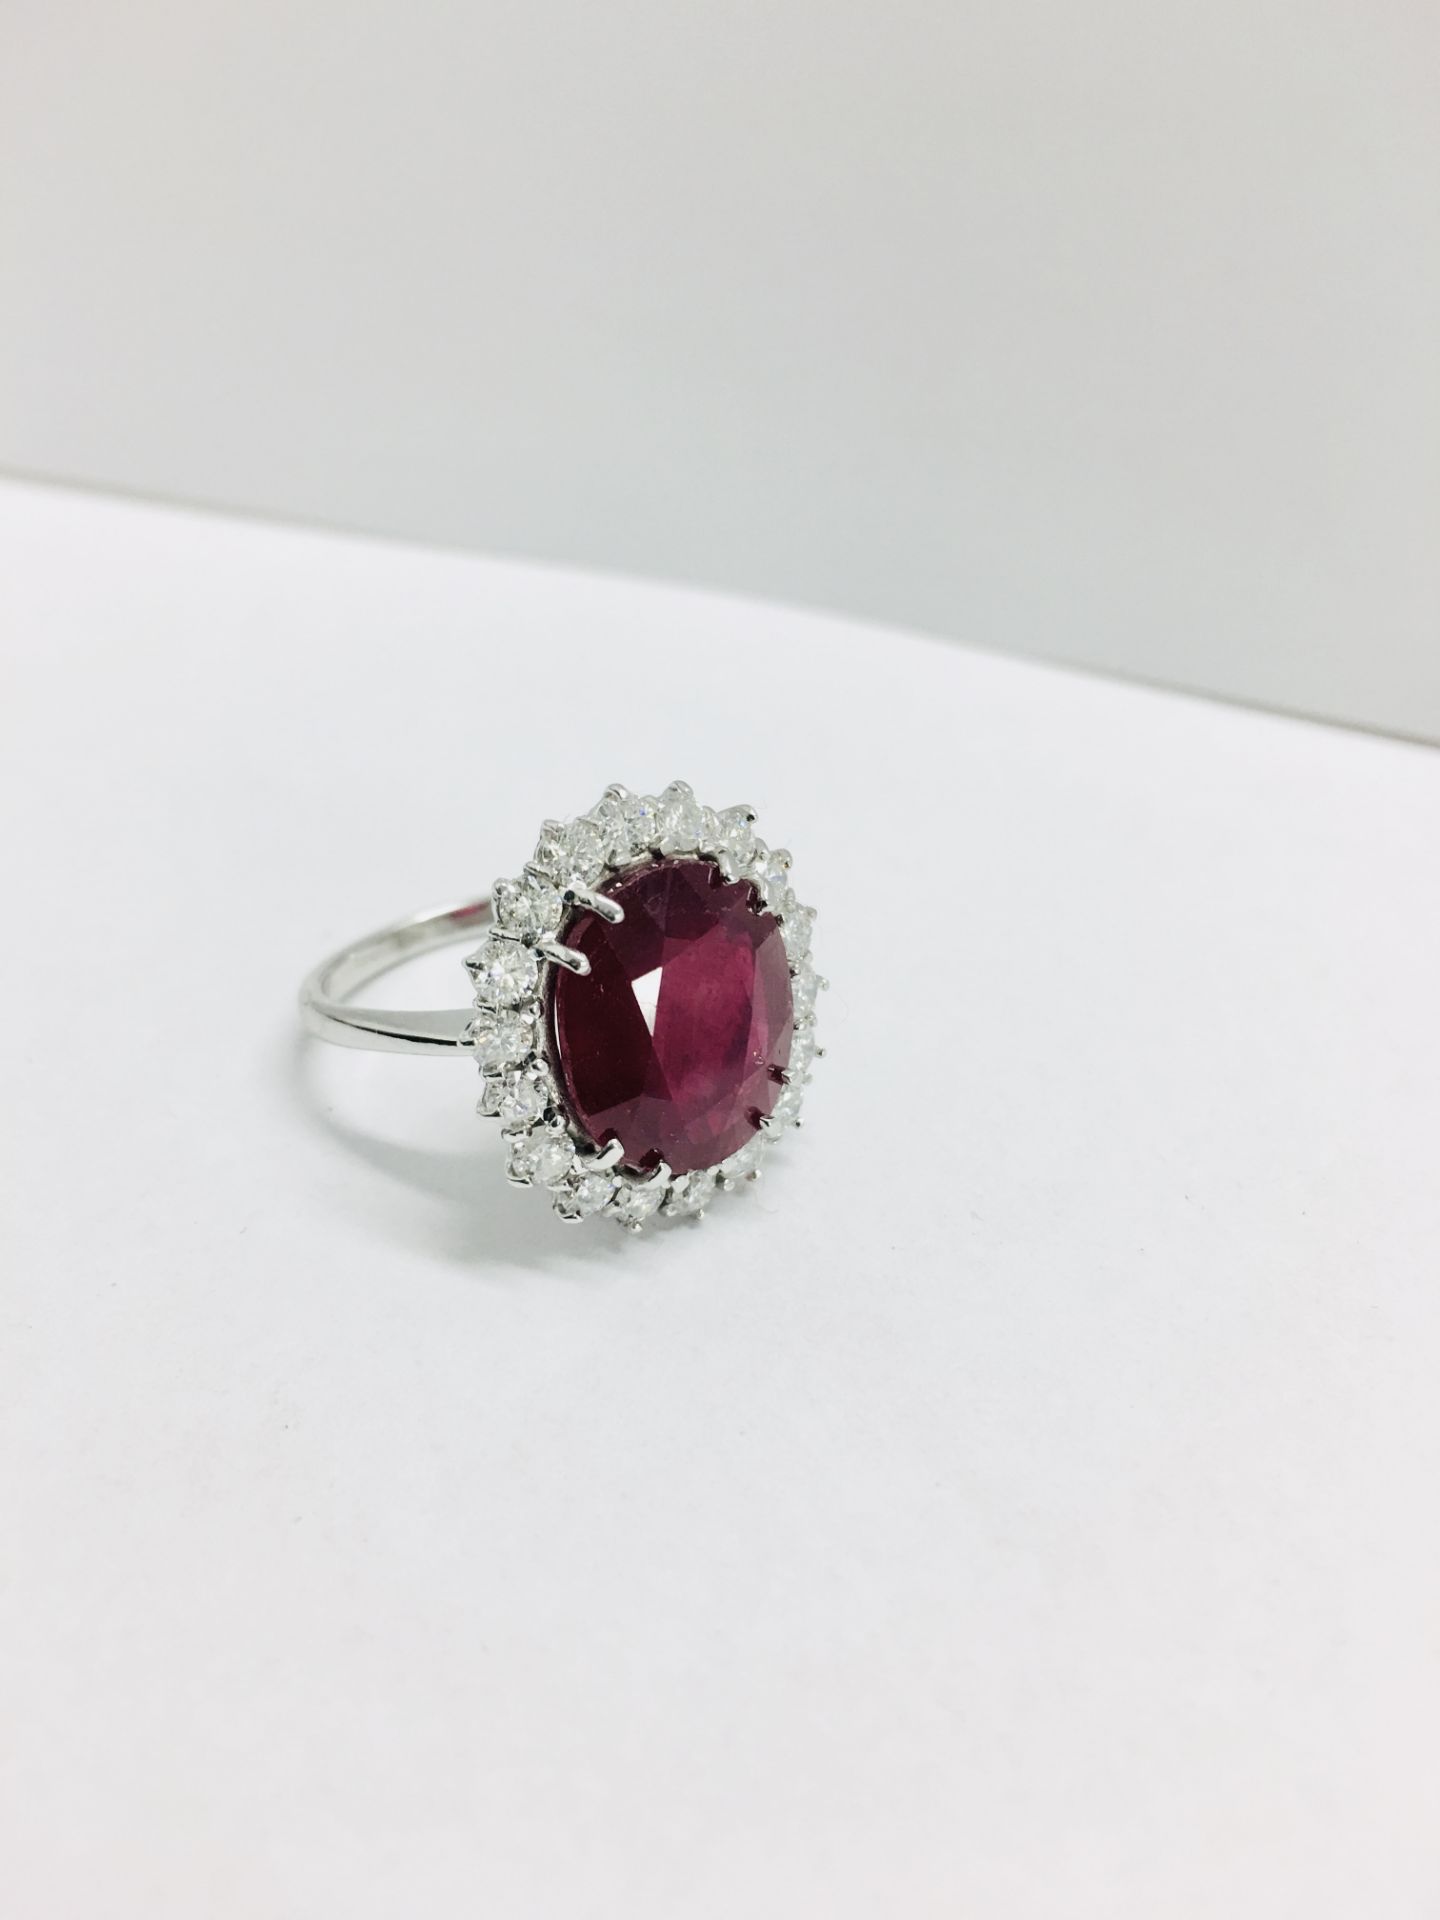 10Ct Ruby And Diamond Cluster Ring. - Image 2 of 11